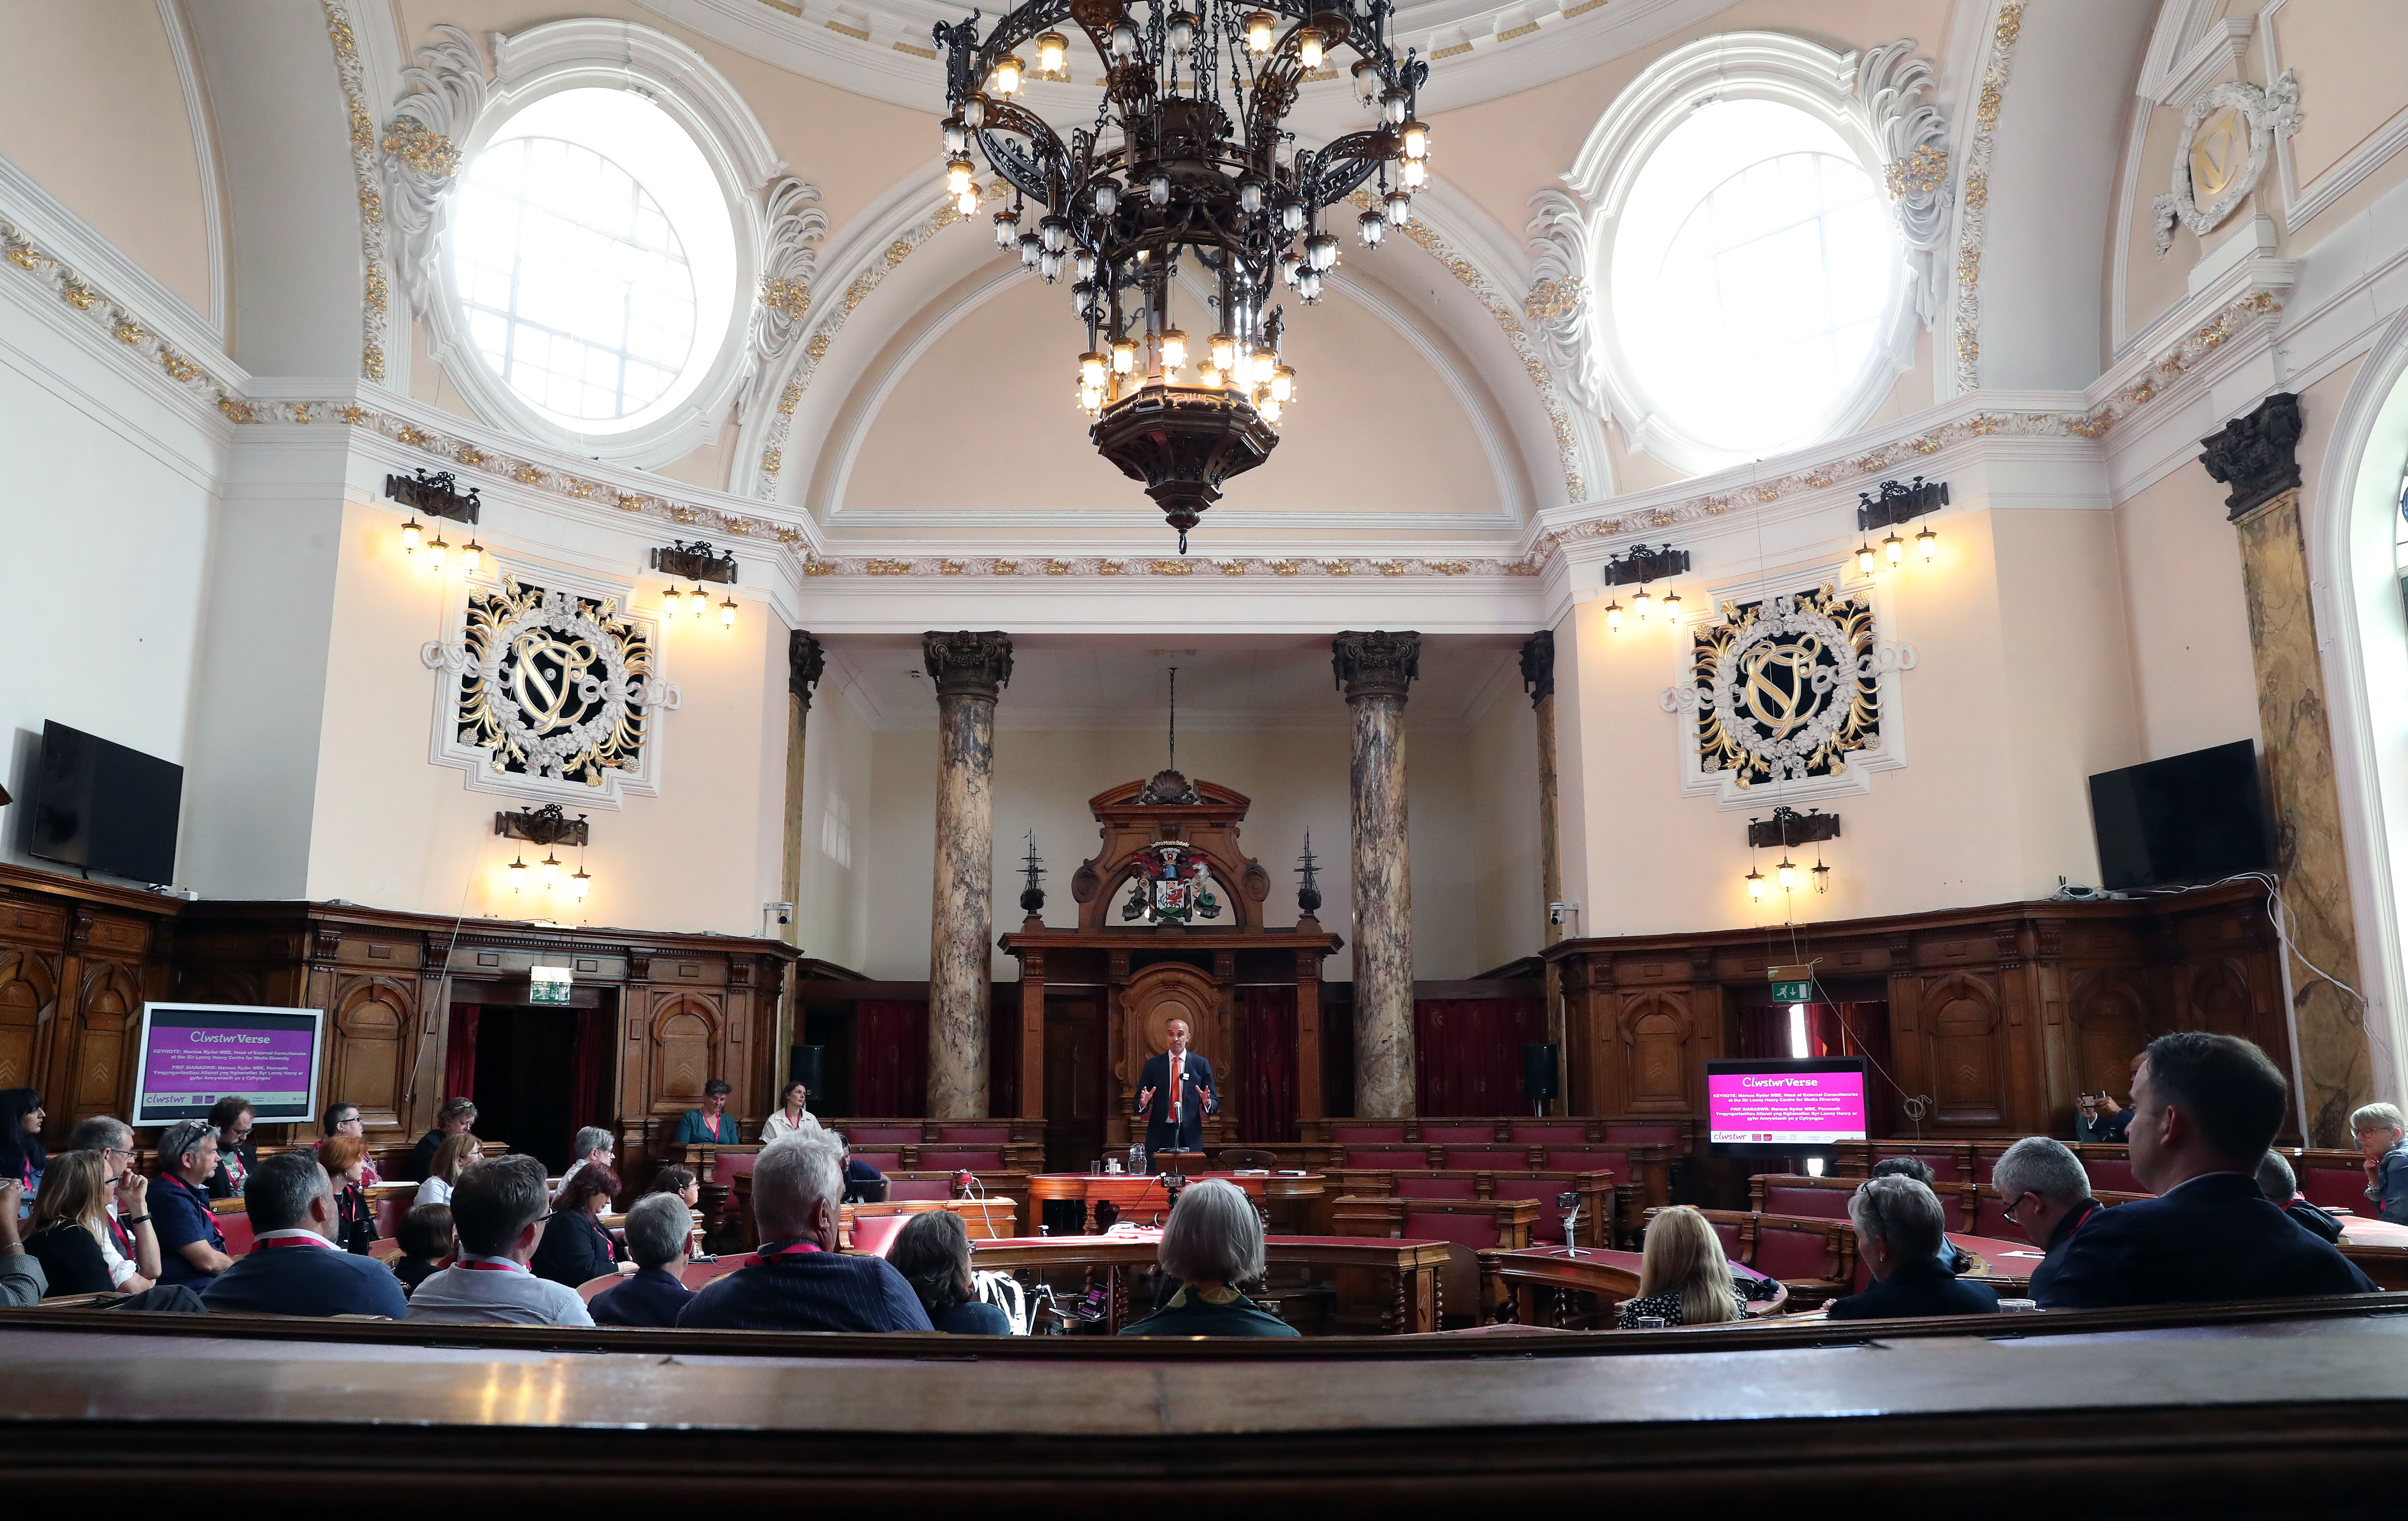 Marcus Ryder MBE presents to audience in the Council Chamber at Cardiff City Hall for ClwstwrVerse